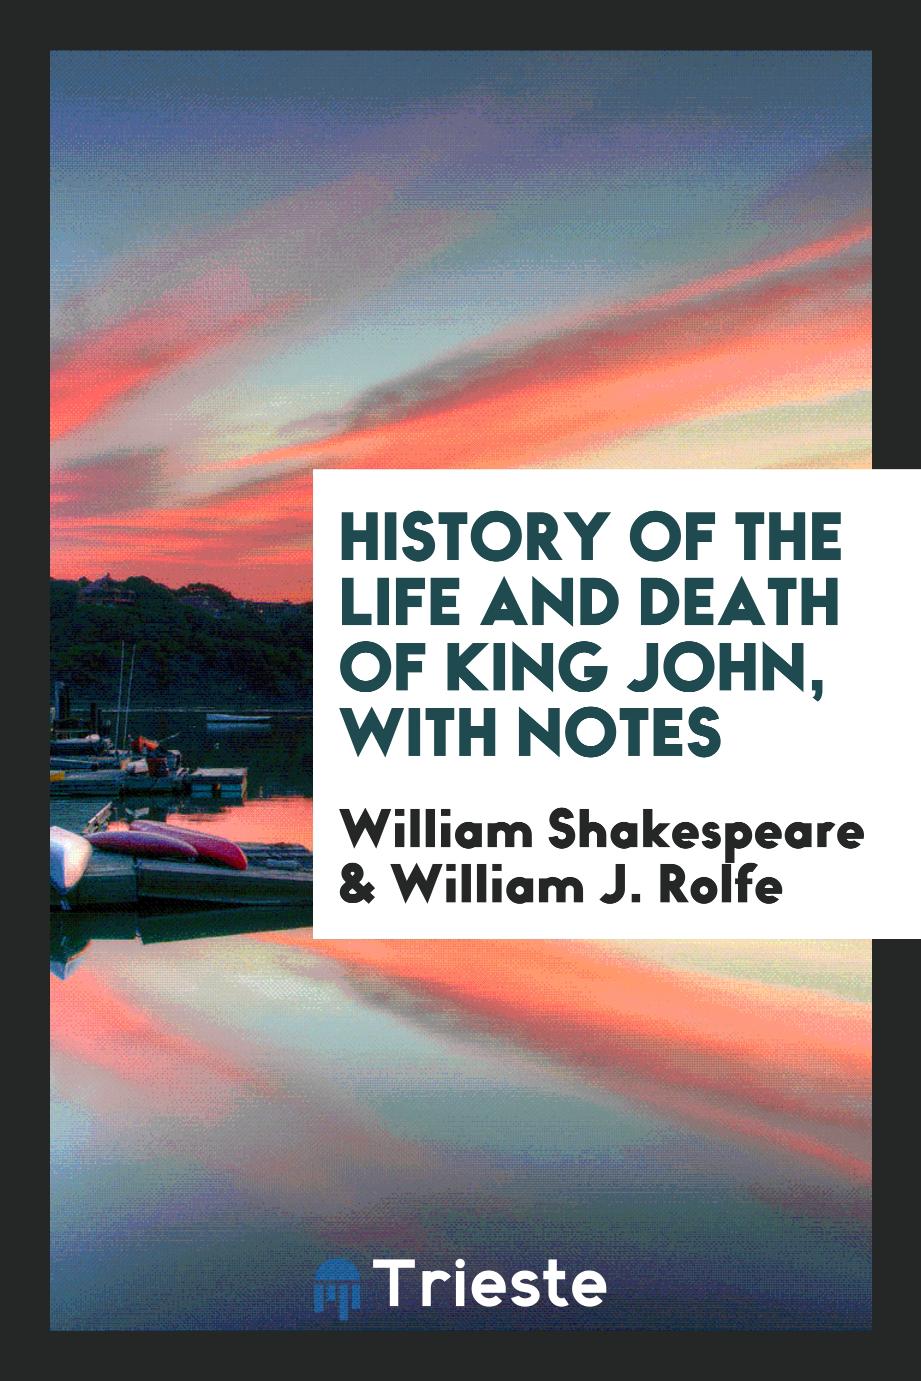 History of the Life and Death of King John, with Notes